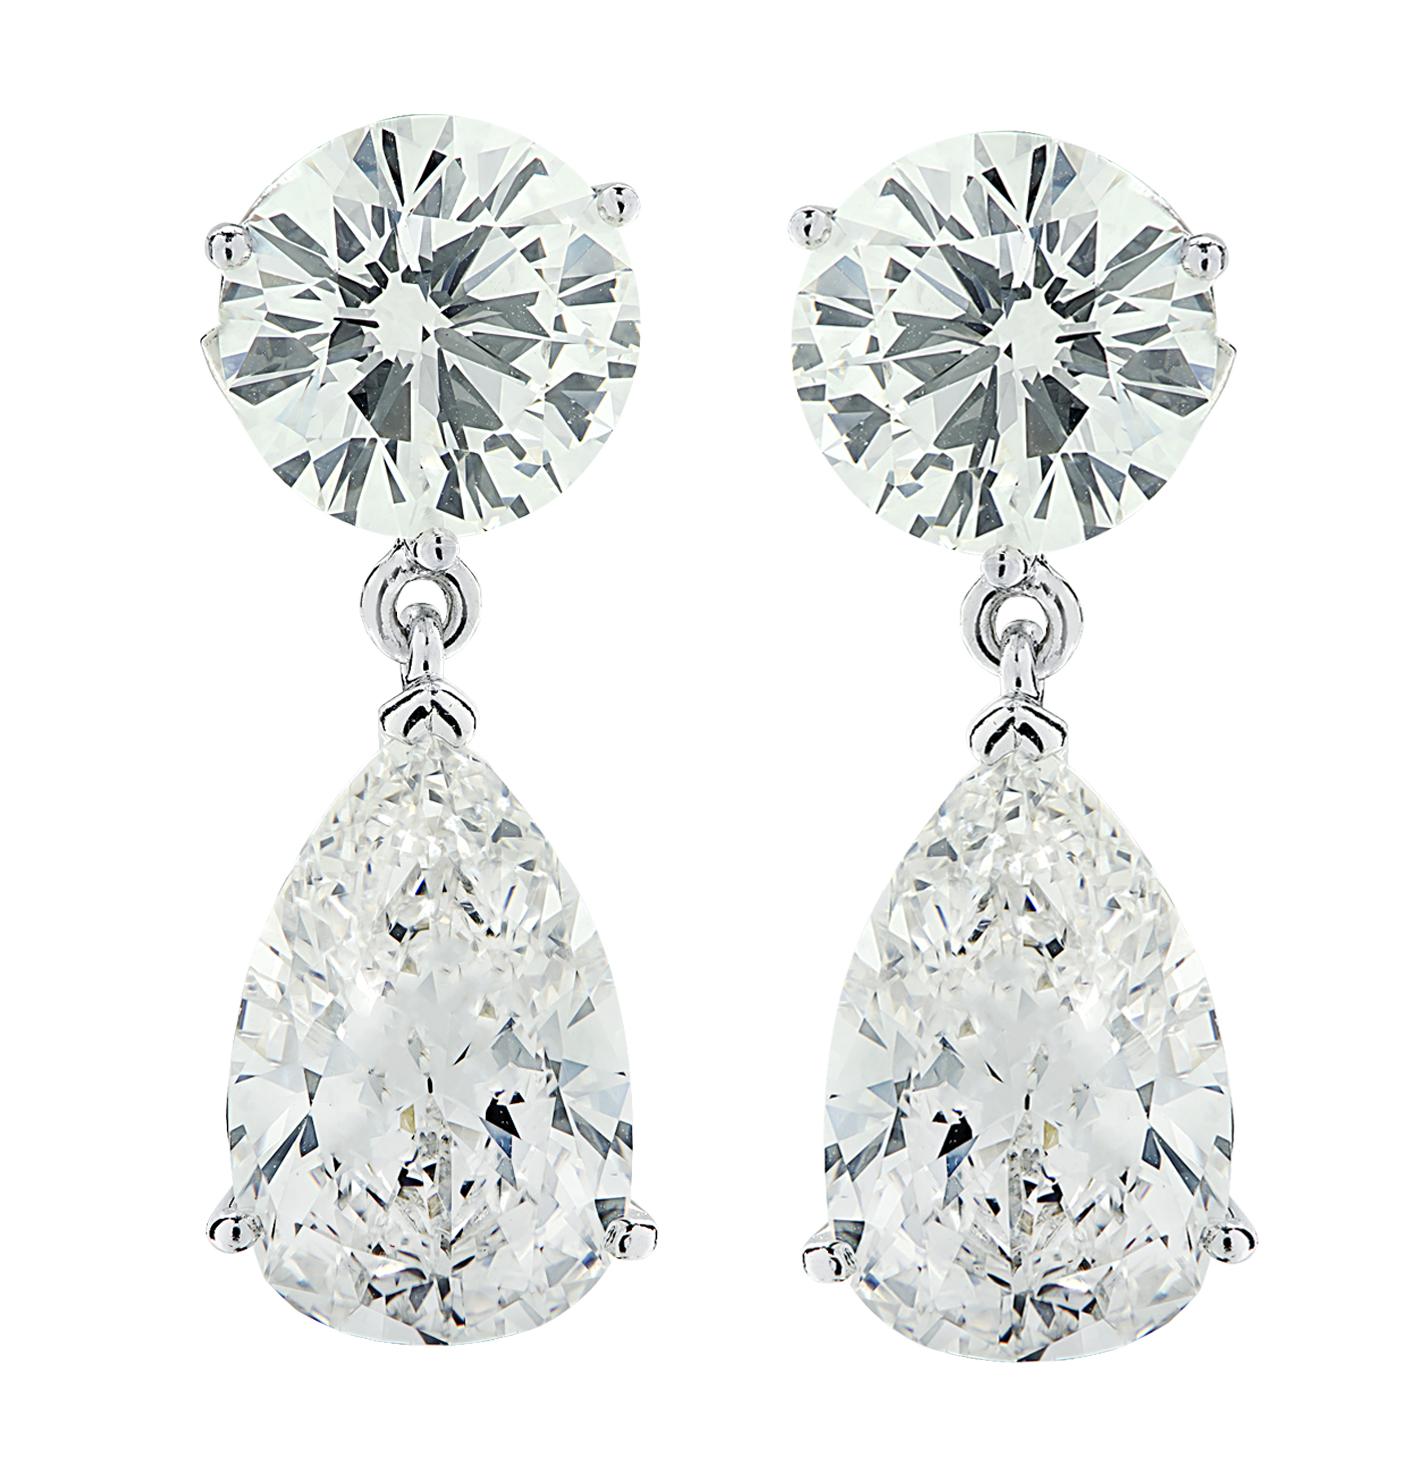 Sensational Vivid Diamonds Dangle earrings crafted in platinum showcasing 2 GIA certified round brilliant cut diamonds weighing 6.05 carats total, G-H color, VS1-SI1 clarity and 2 GIA Certified pear shape diamonds weighing 8.75 carats total, G-H